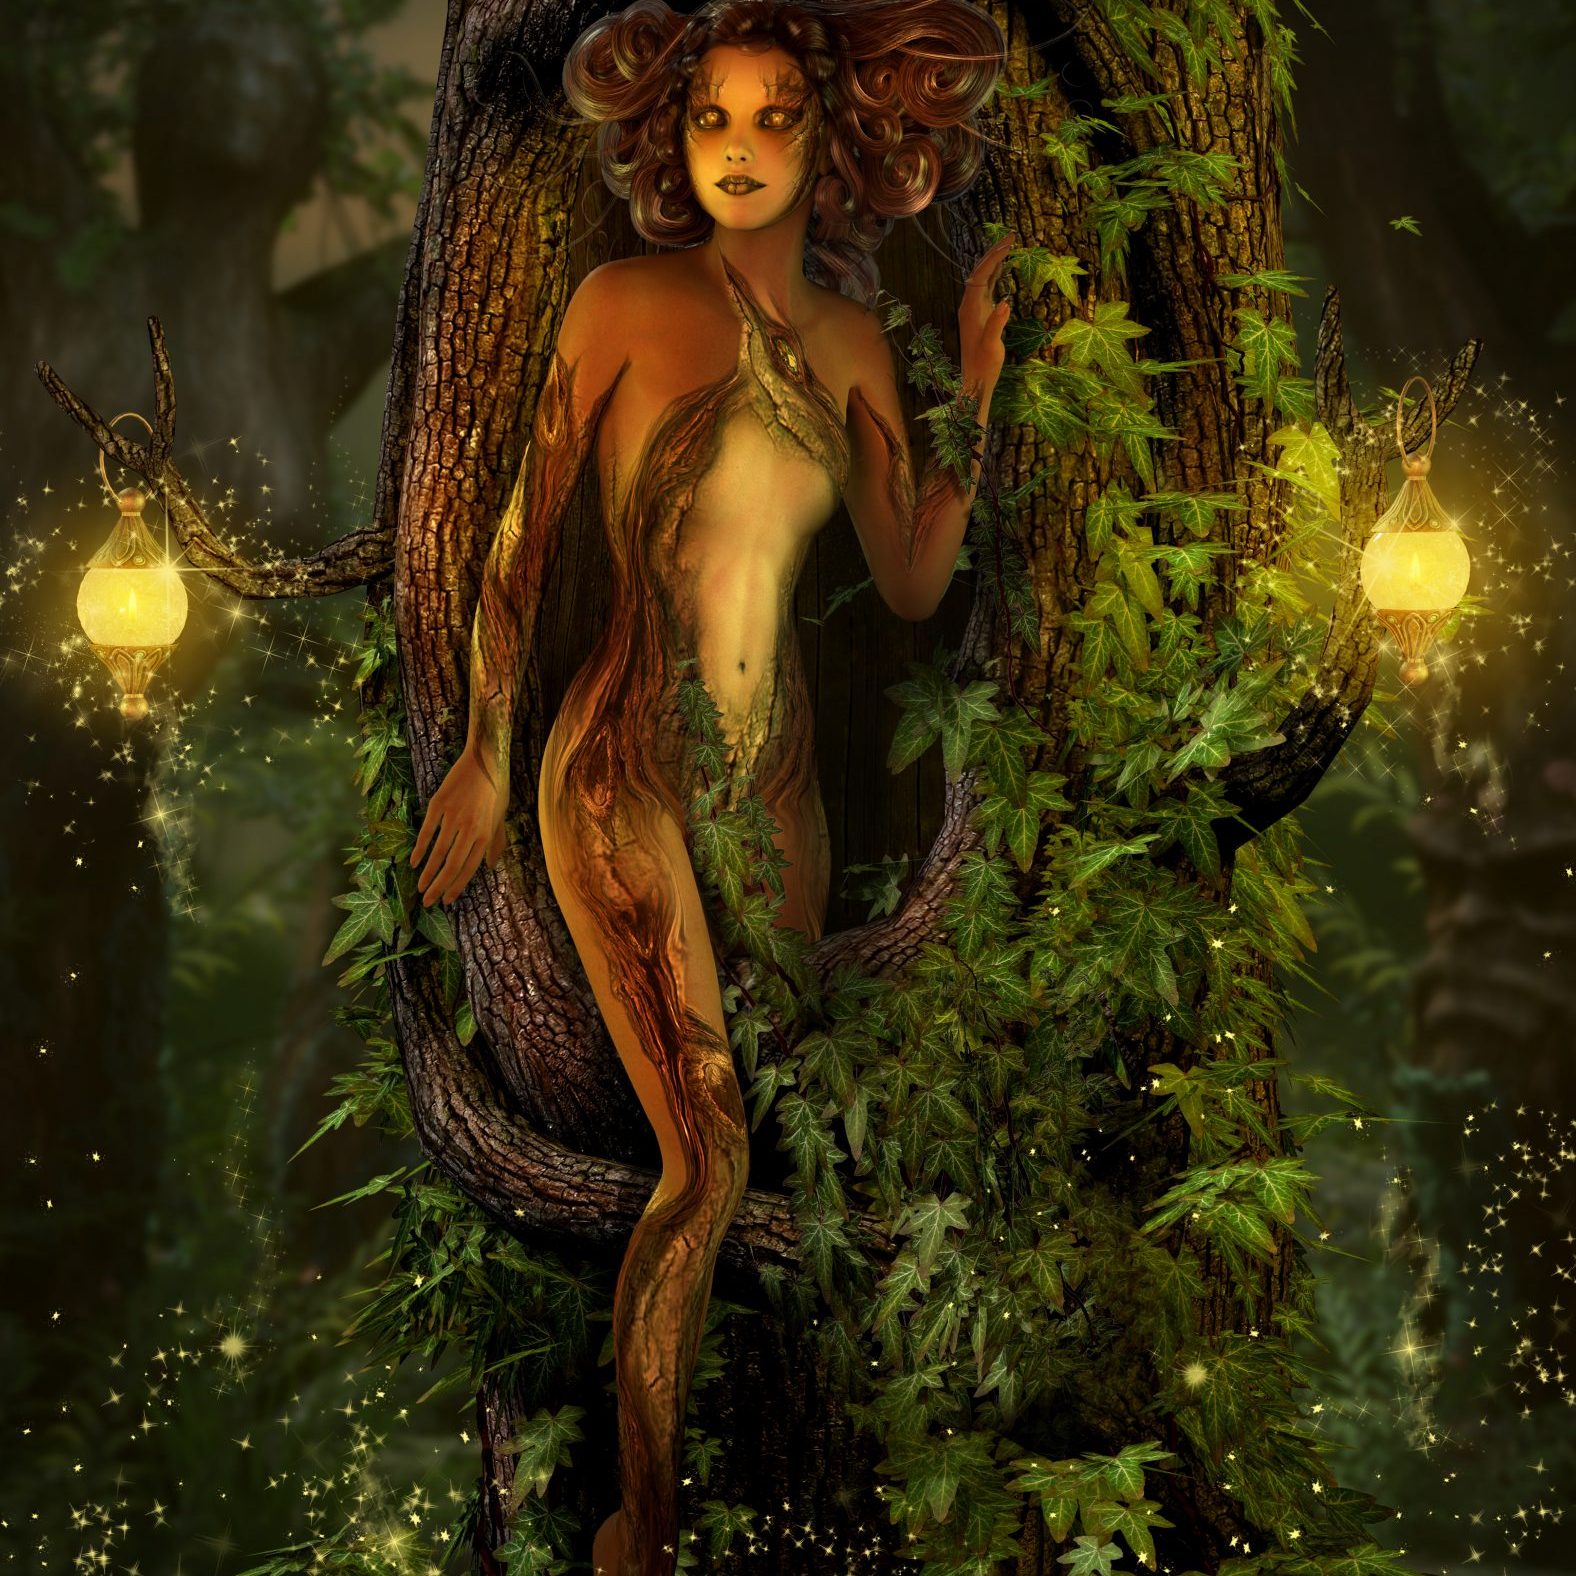 A fayad steps forth from a tree trunk, two lanterns light her slender figure in a soft glow. Vines and ivy climb the base of the tree creating a verdant backdrop for the slender figure. Her skin is mottled in browns and beiges, patterned like tree bark but with a smooth texture. The fayad's face is ethereal and alien, while humanoid in construction, her eyes gleam silver.